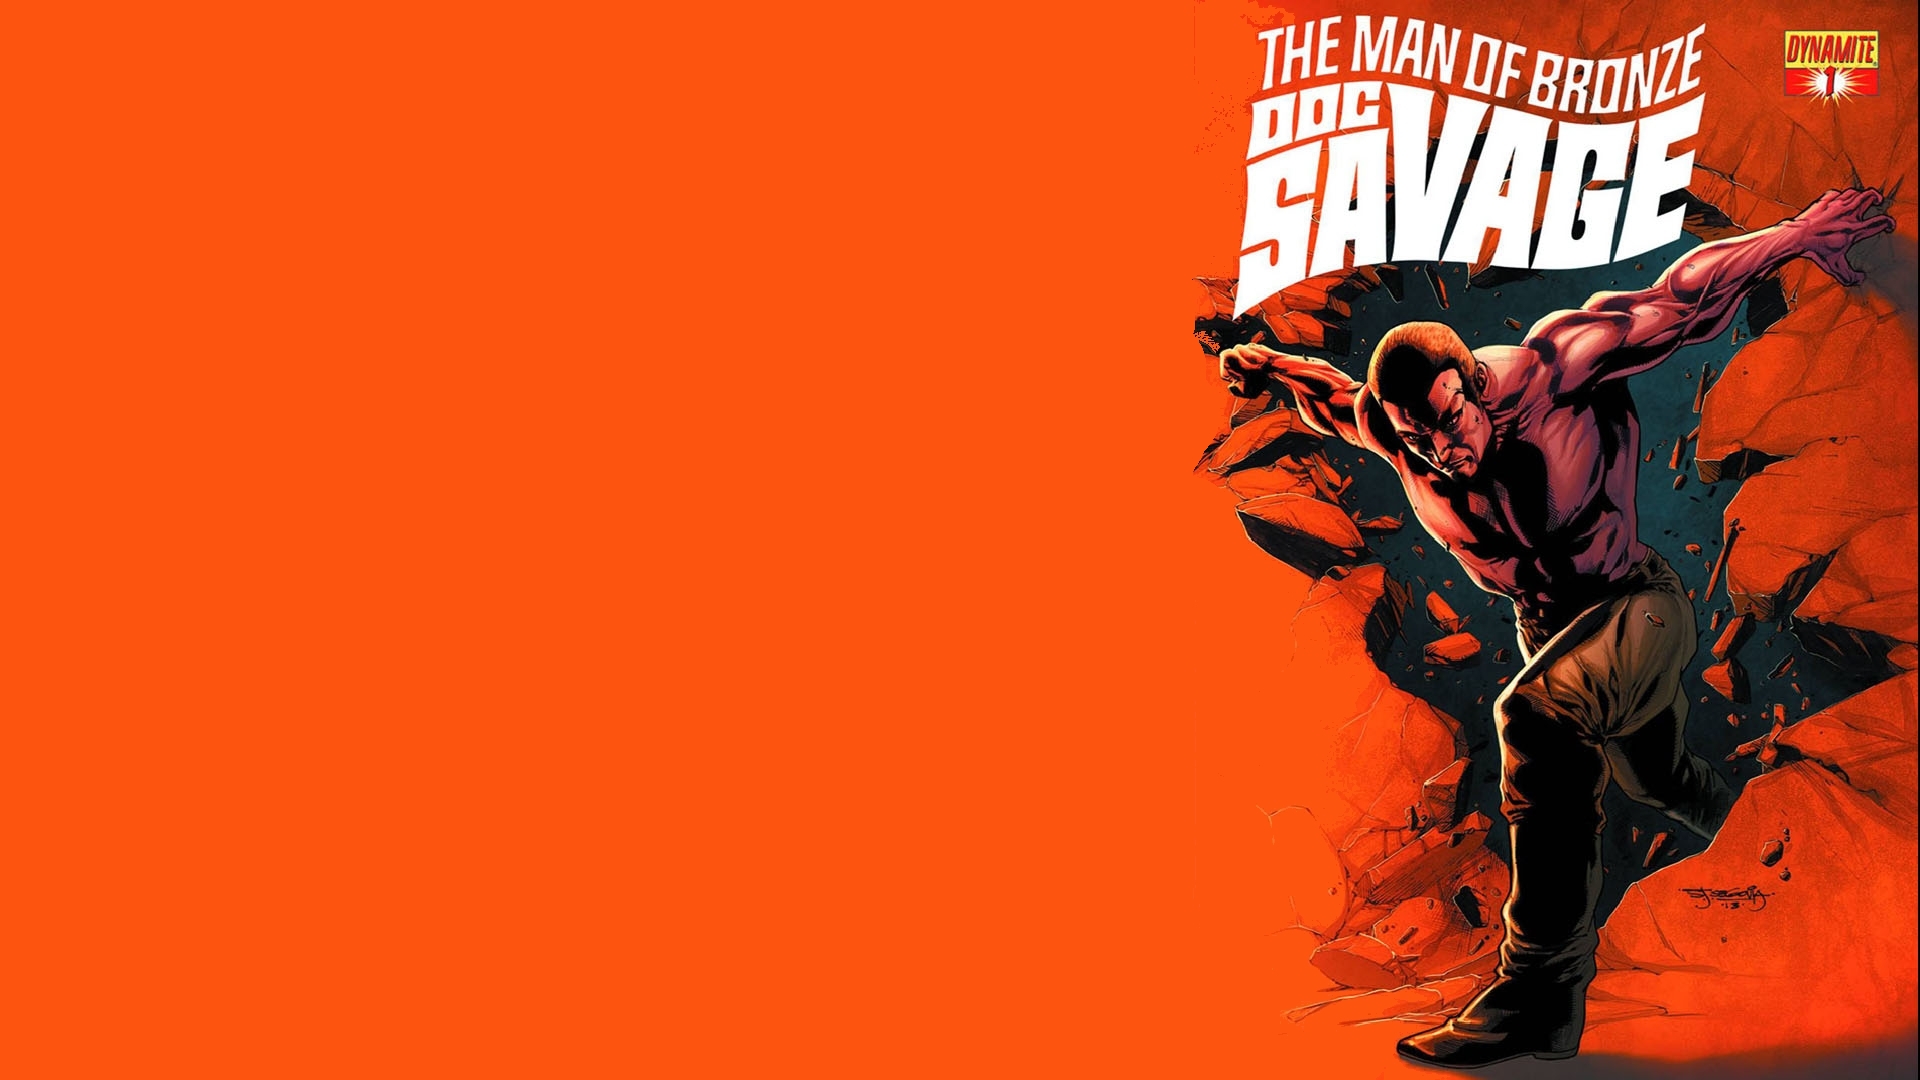 3 Doc Savage Hd Wallpapers Backgrounds Wallpaper Abyss Afalchi Free images wallpape [afalchi.blogspot.com]